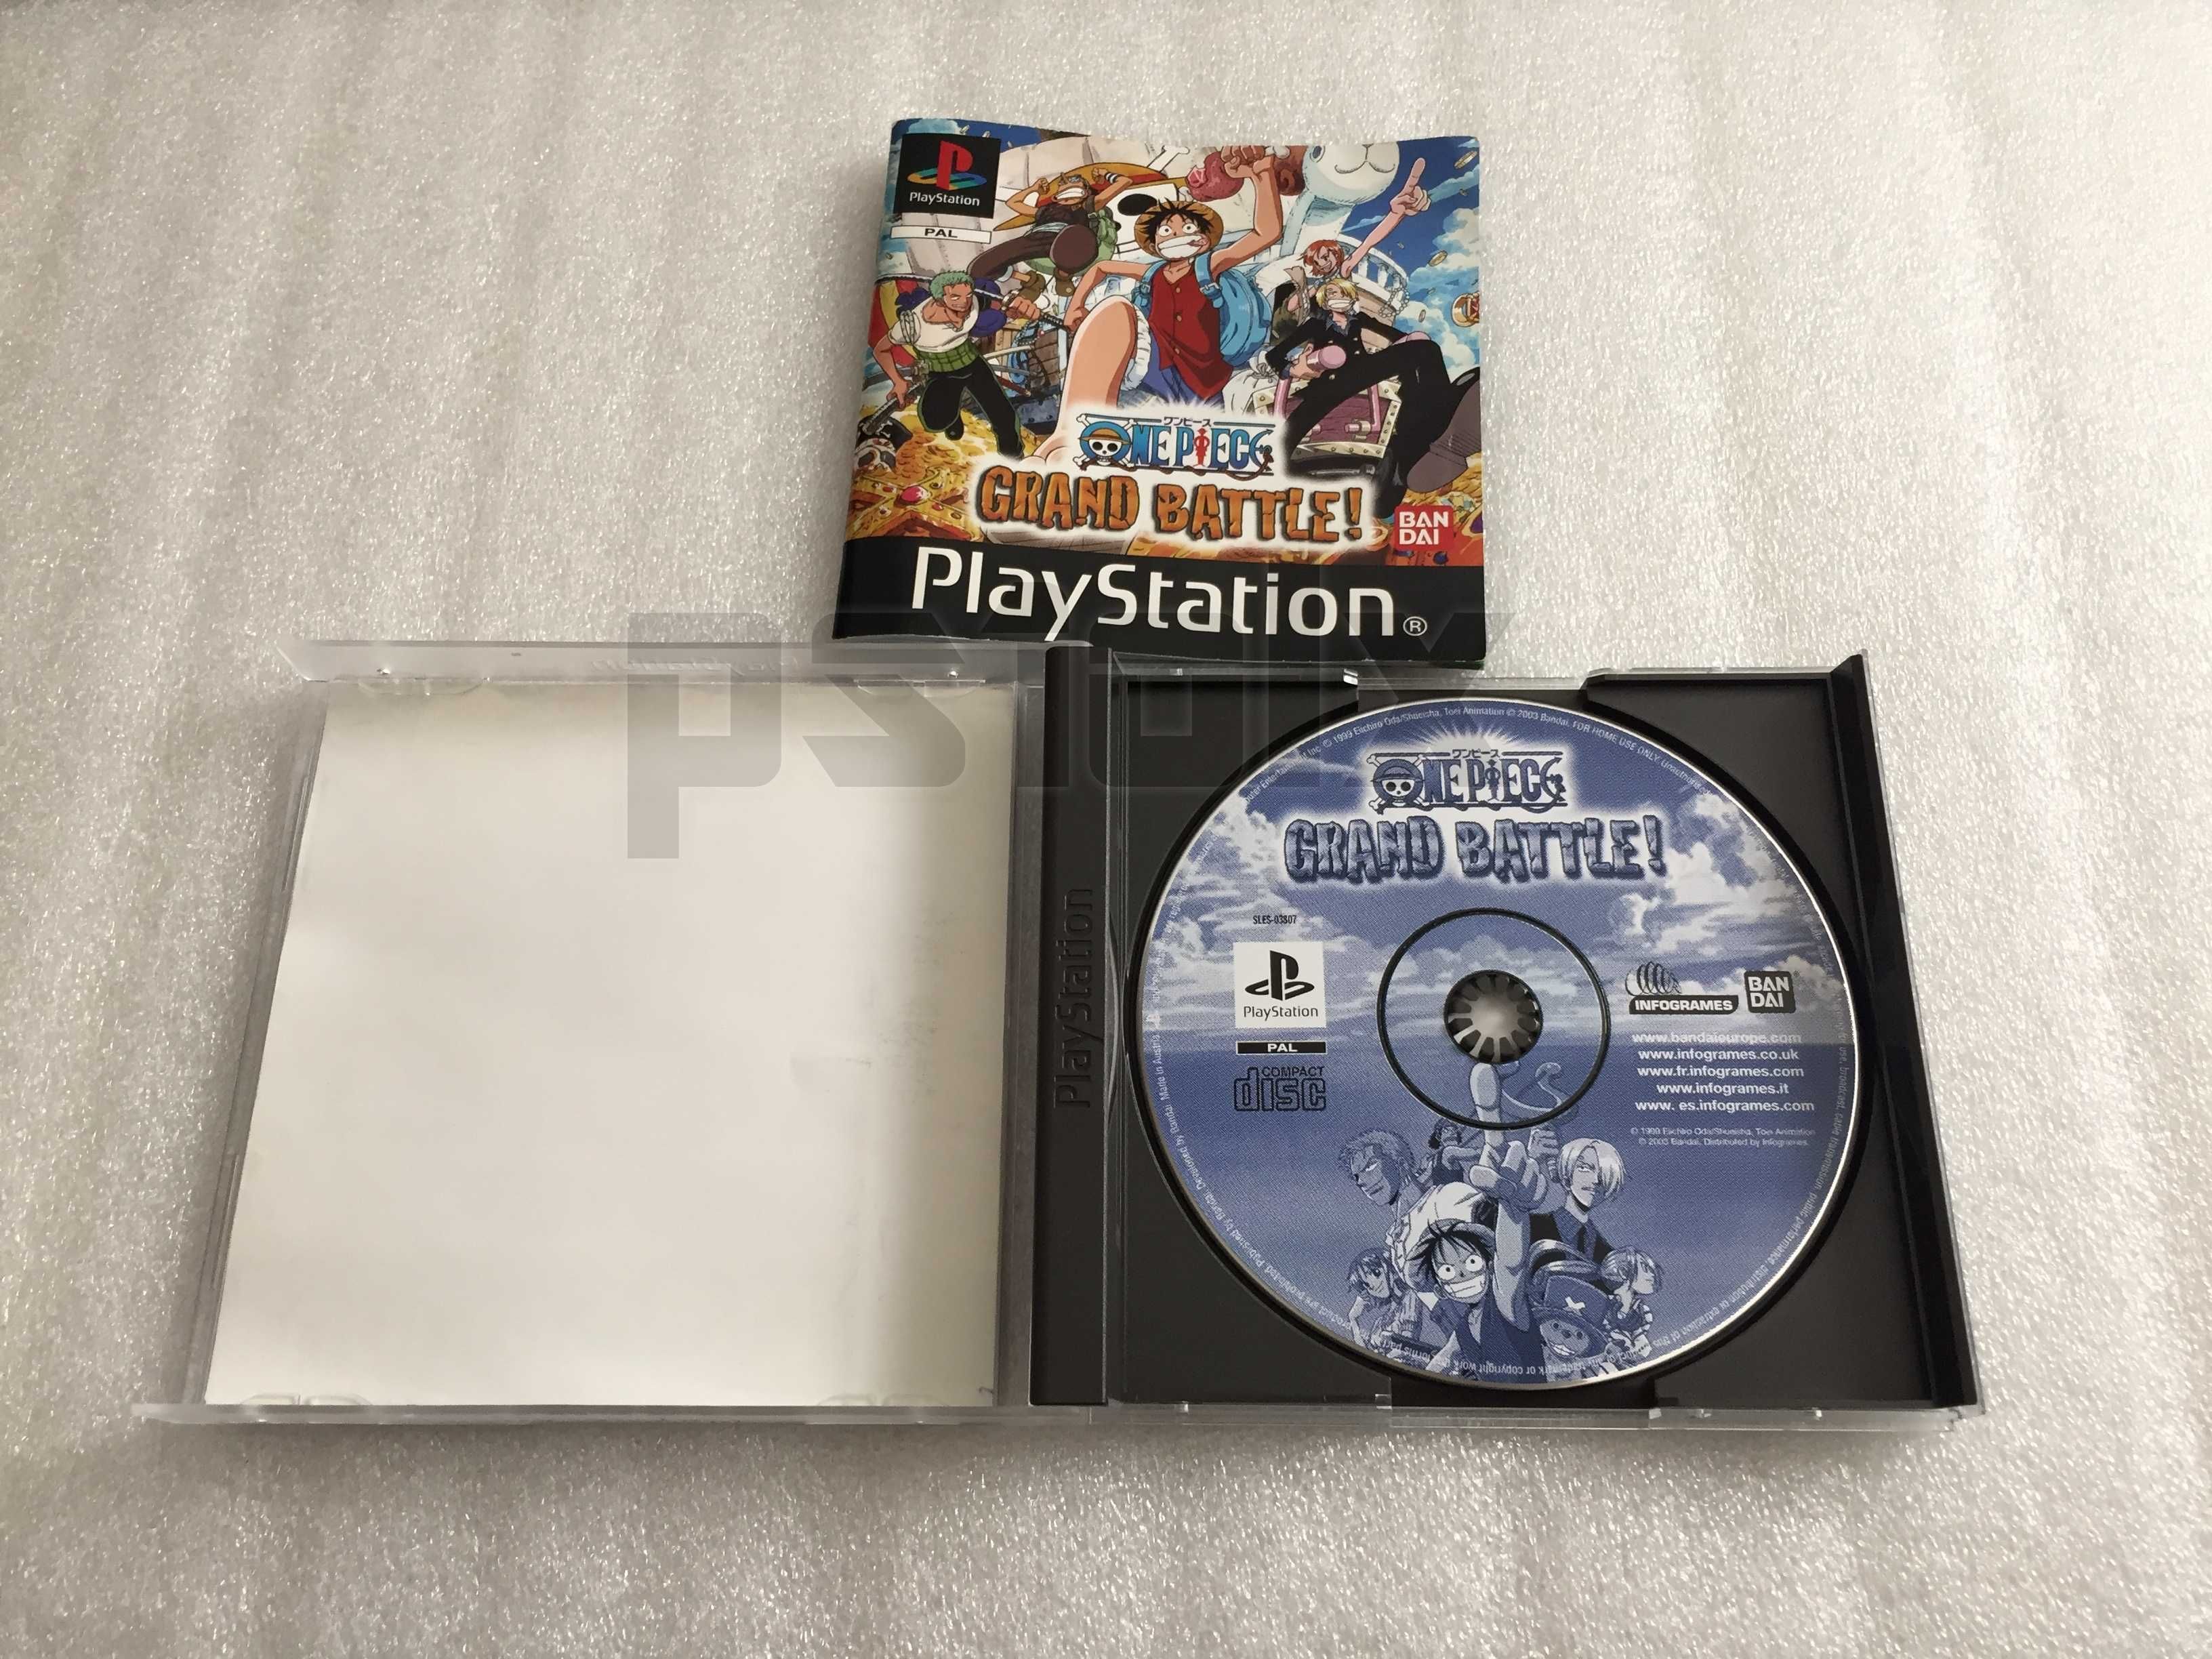 One Piece: Grand Battle! playstation ps1